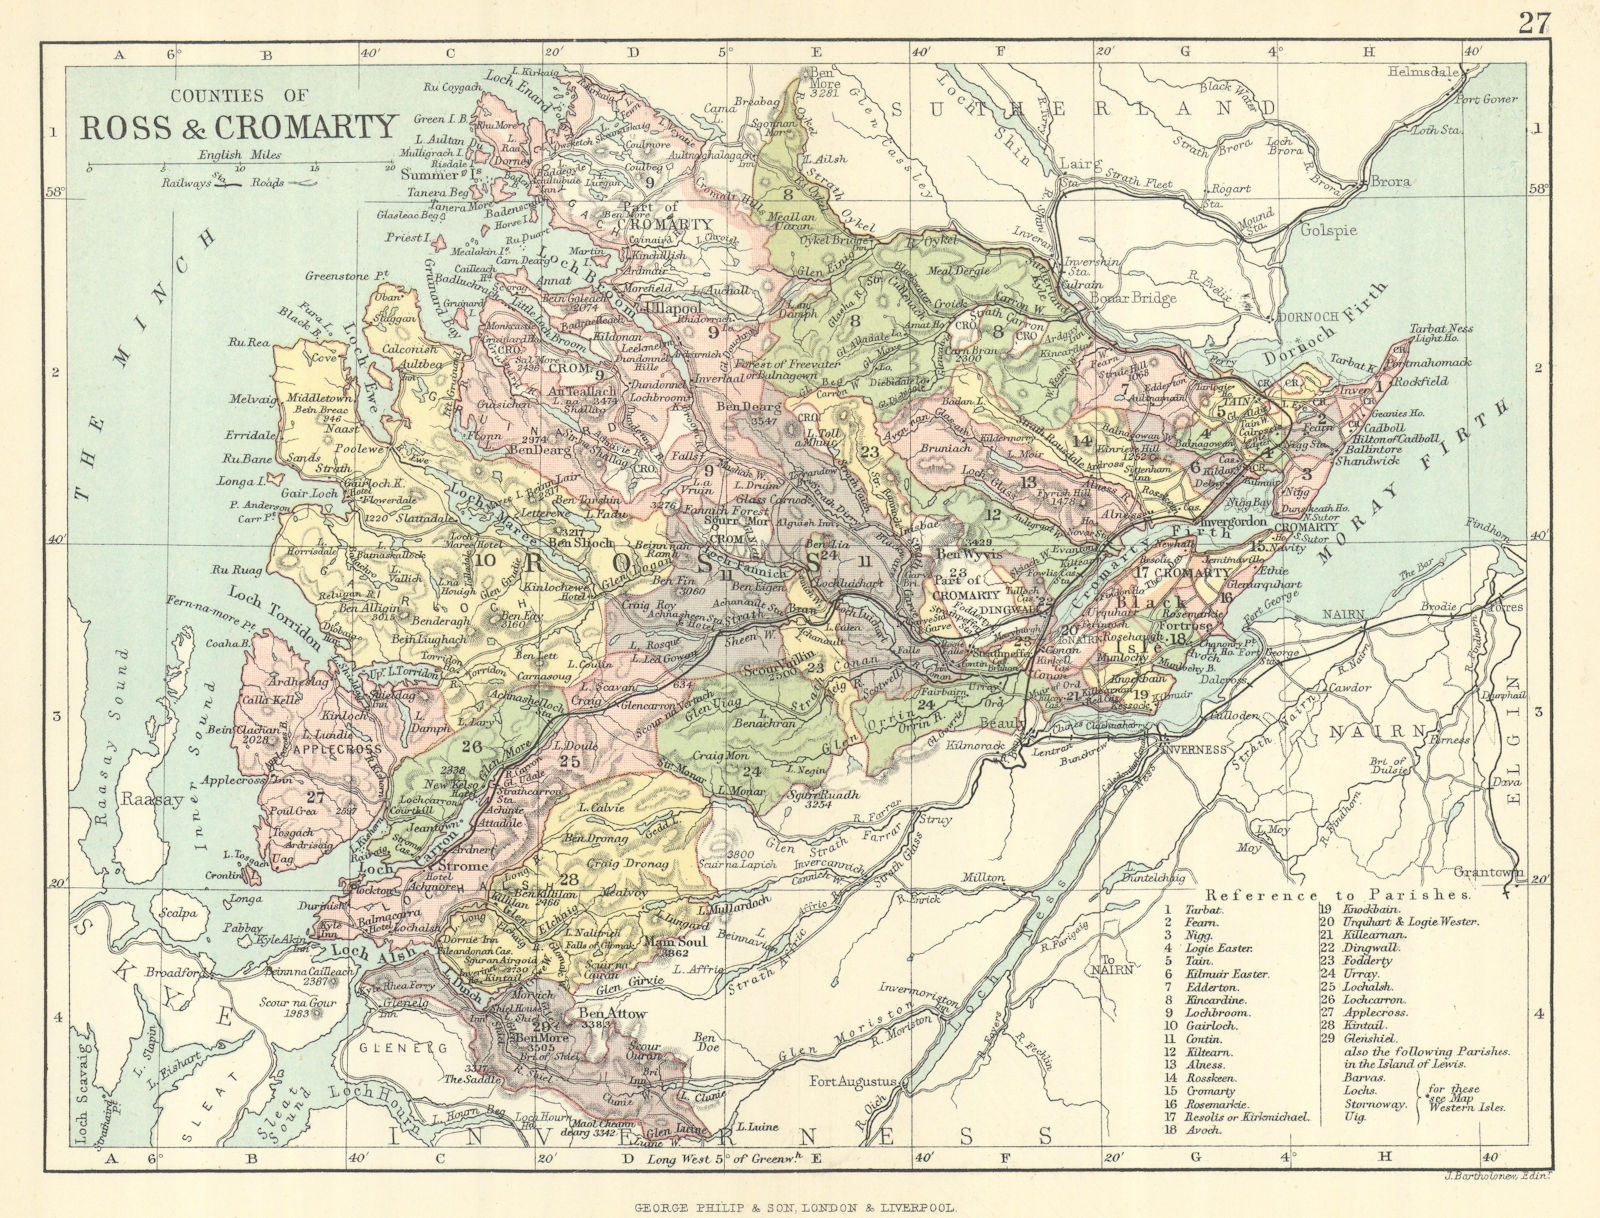 'Counties of Ross & Cromarty'. Ross-shire & Cromartyshire. BARTHOLOMEW 1888 map